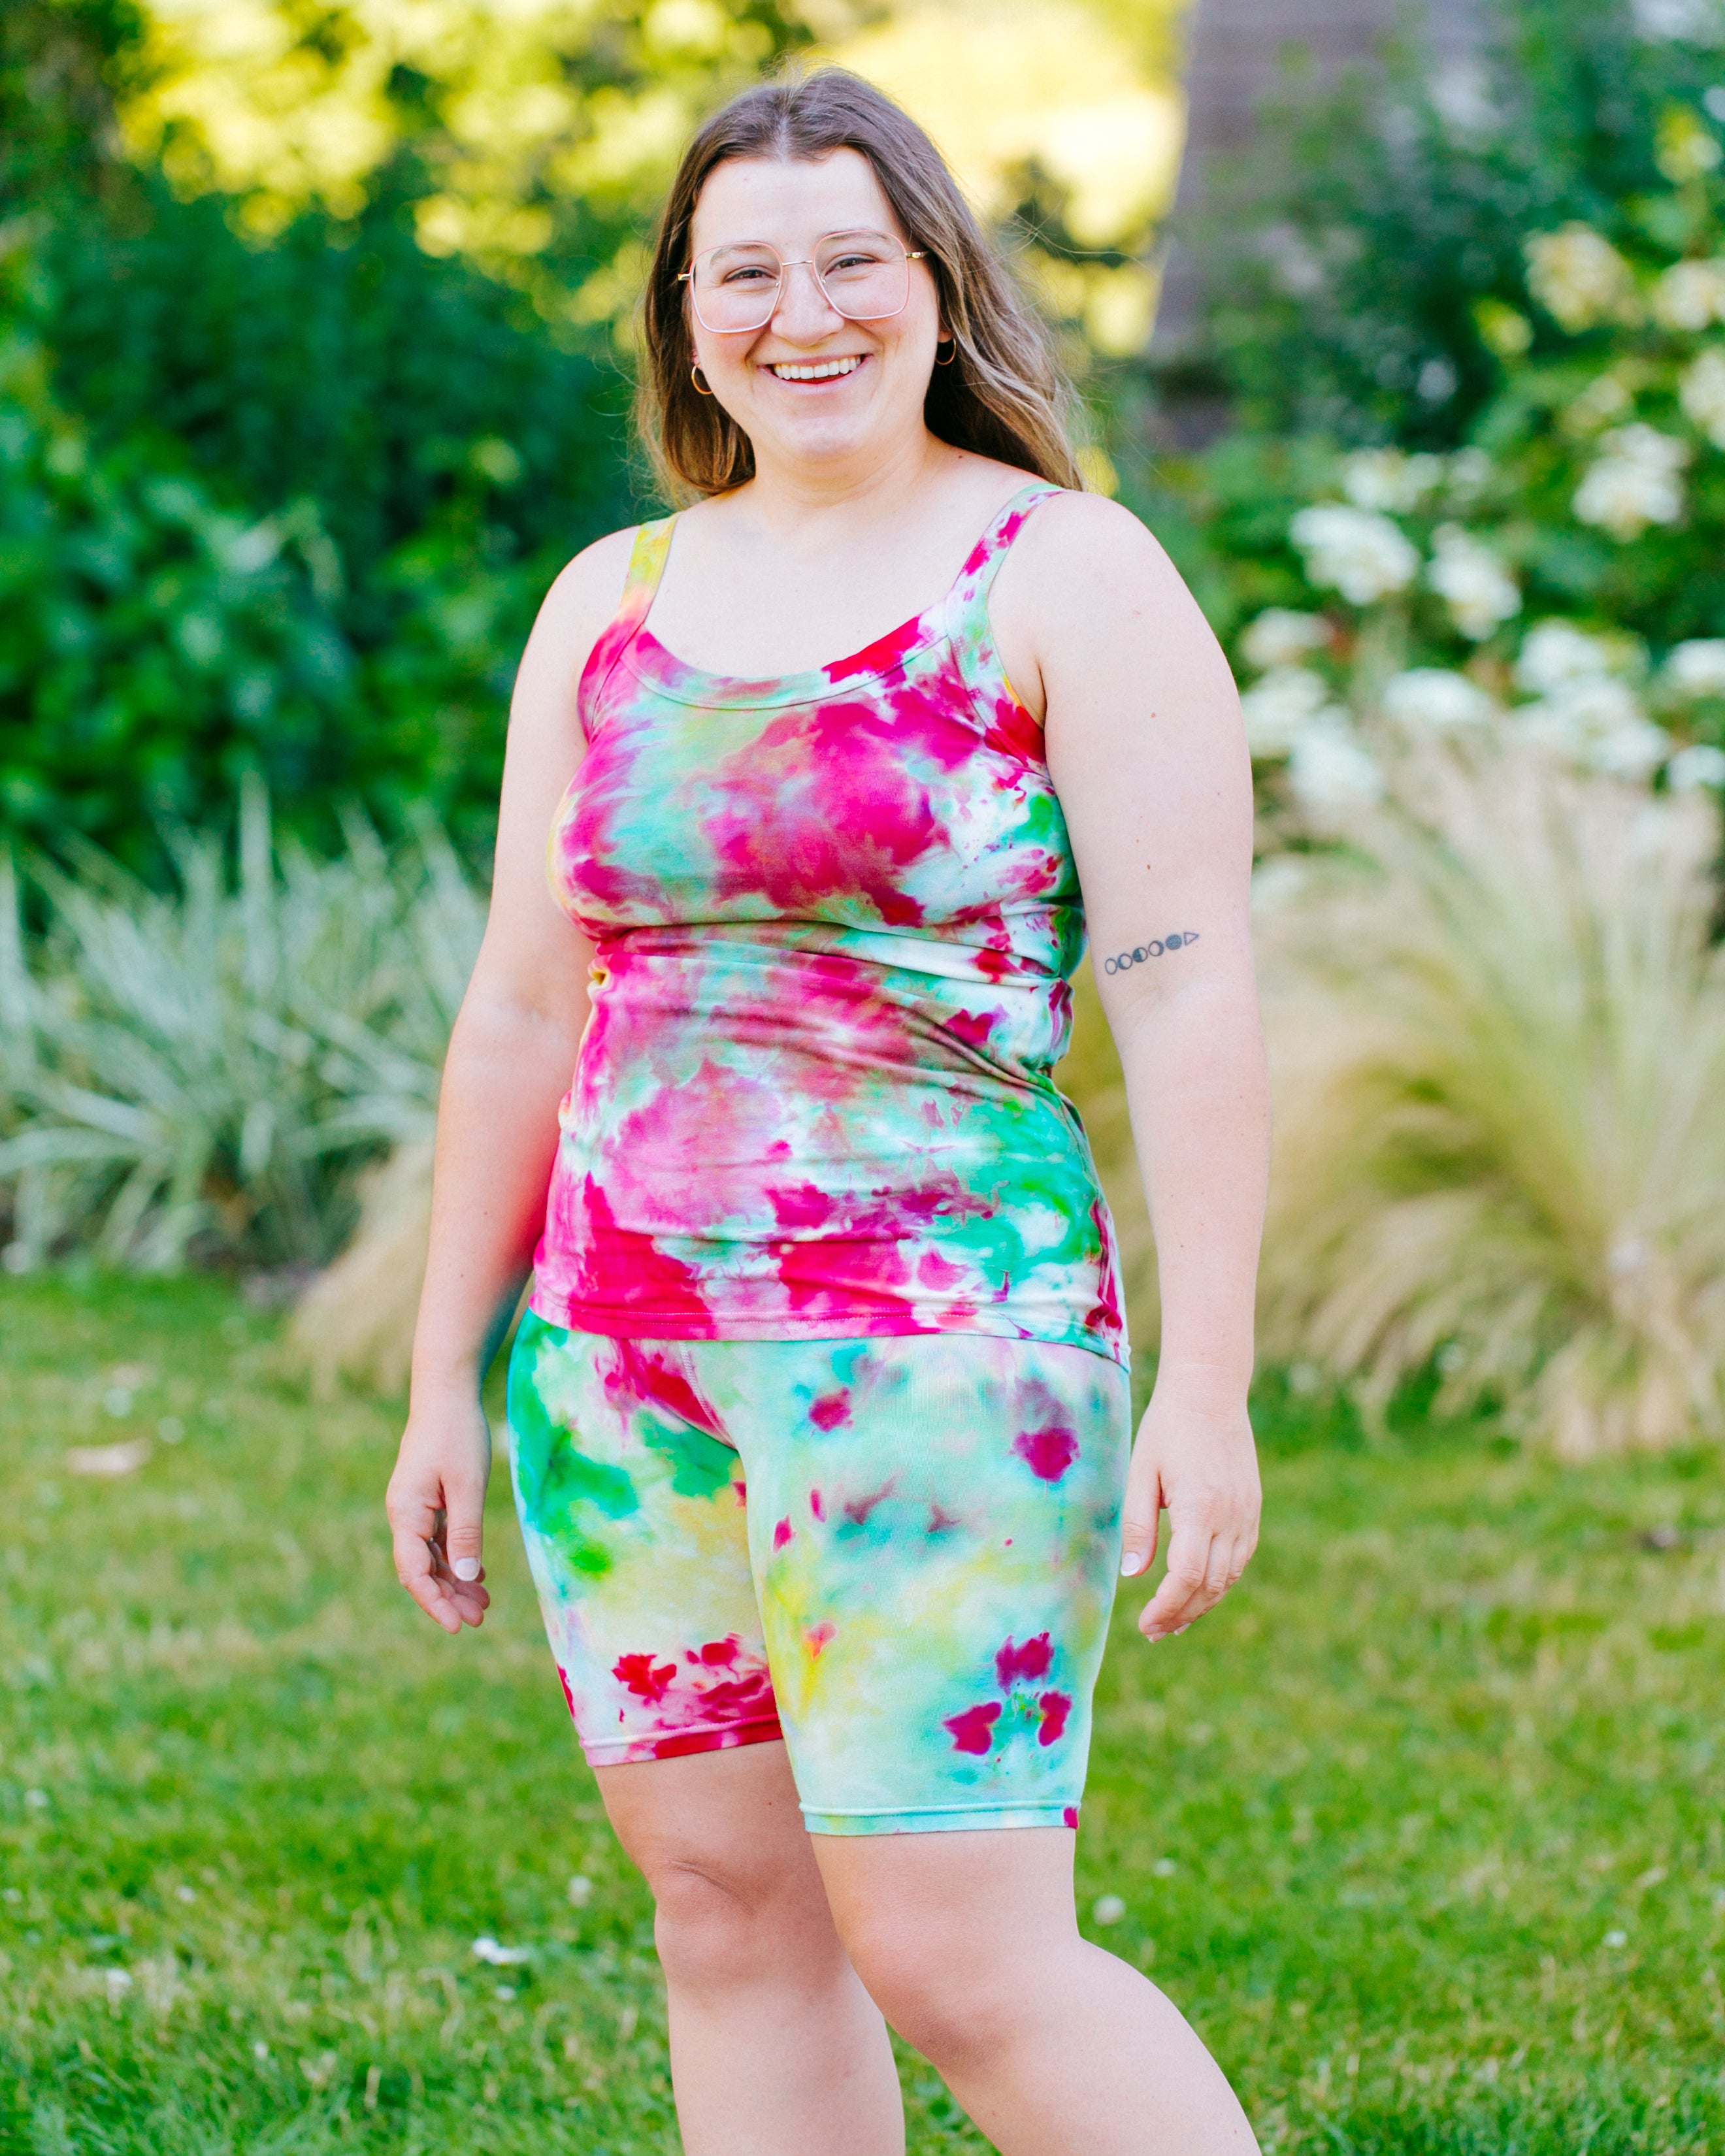 Model smiling and wearing Ice Dyed Camisole and Bike Shorts in a mix of bright green, pink, and yellow colors.